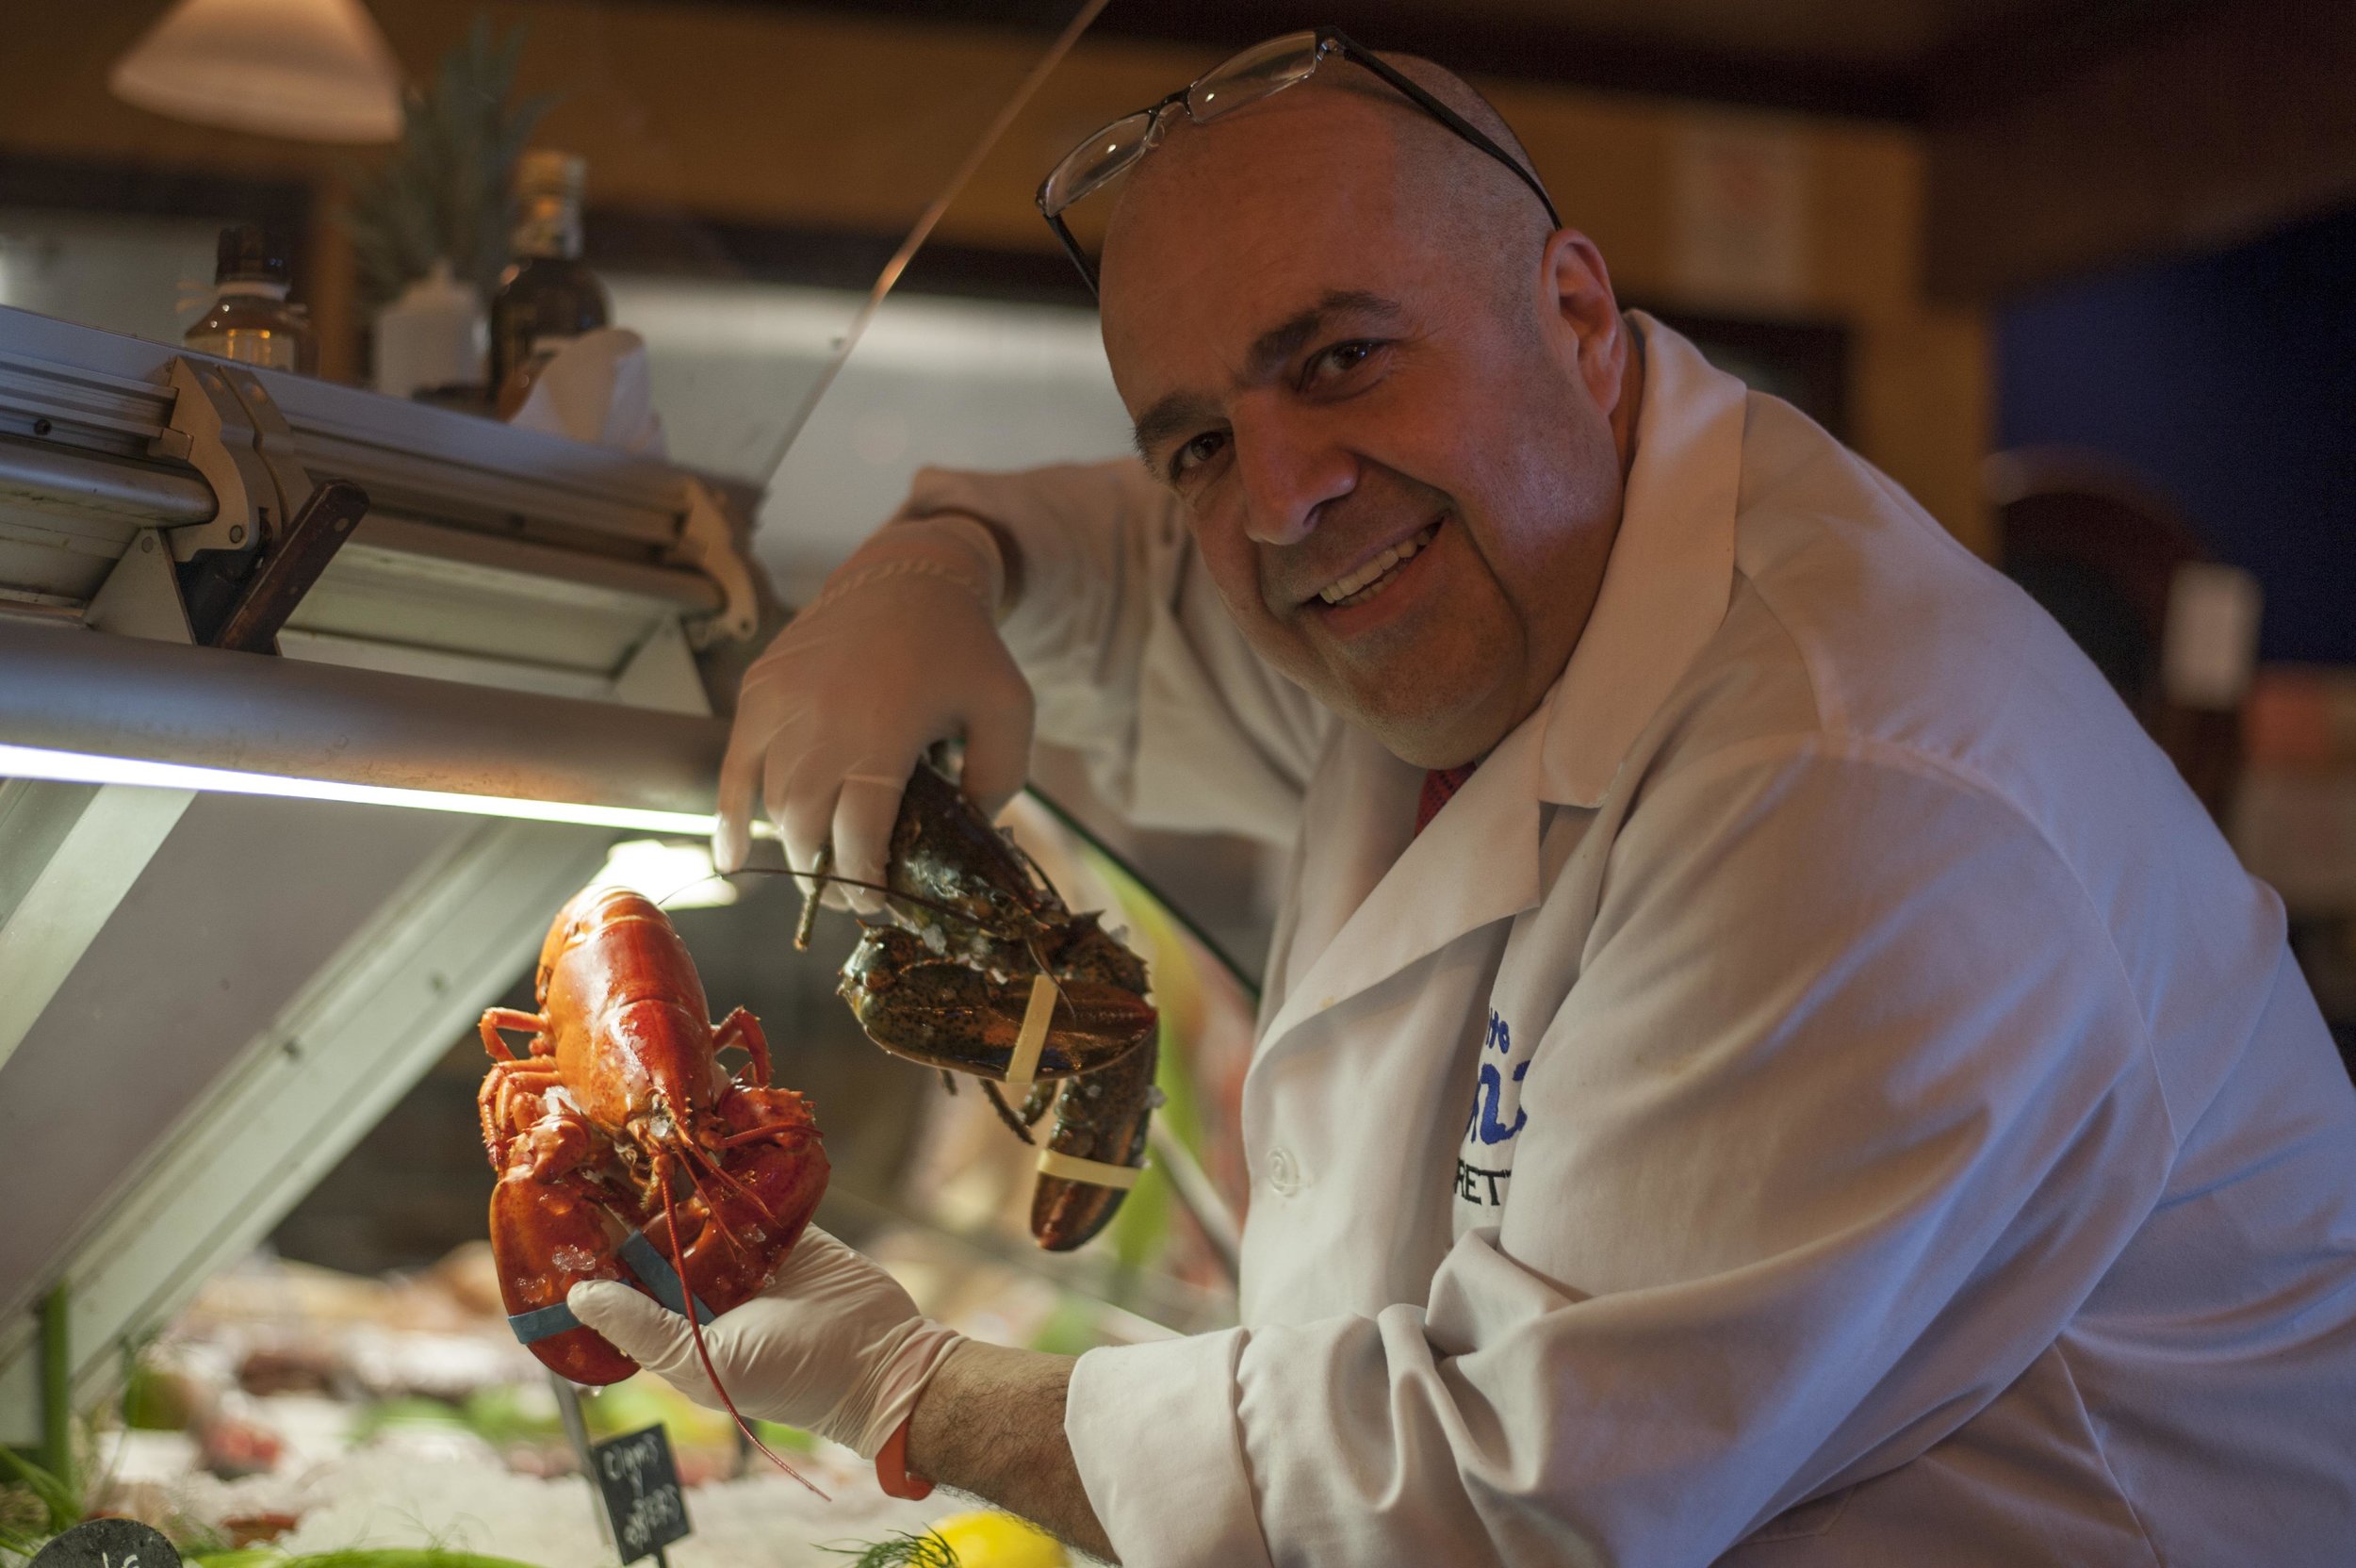   Luigi Petrone, co-owner of Tutto Pazzo, shows off some fresh lobster.   Long Islander News Photo/File  